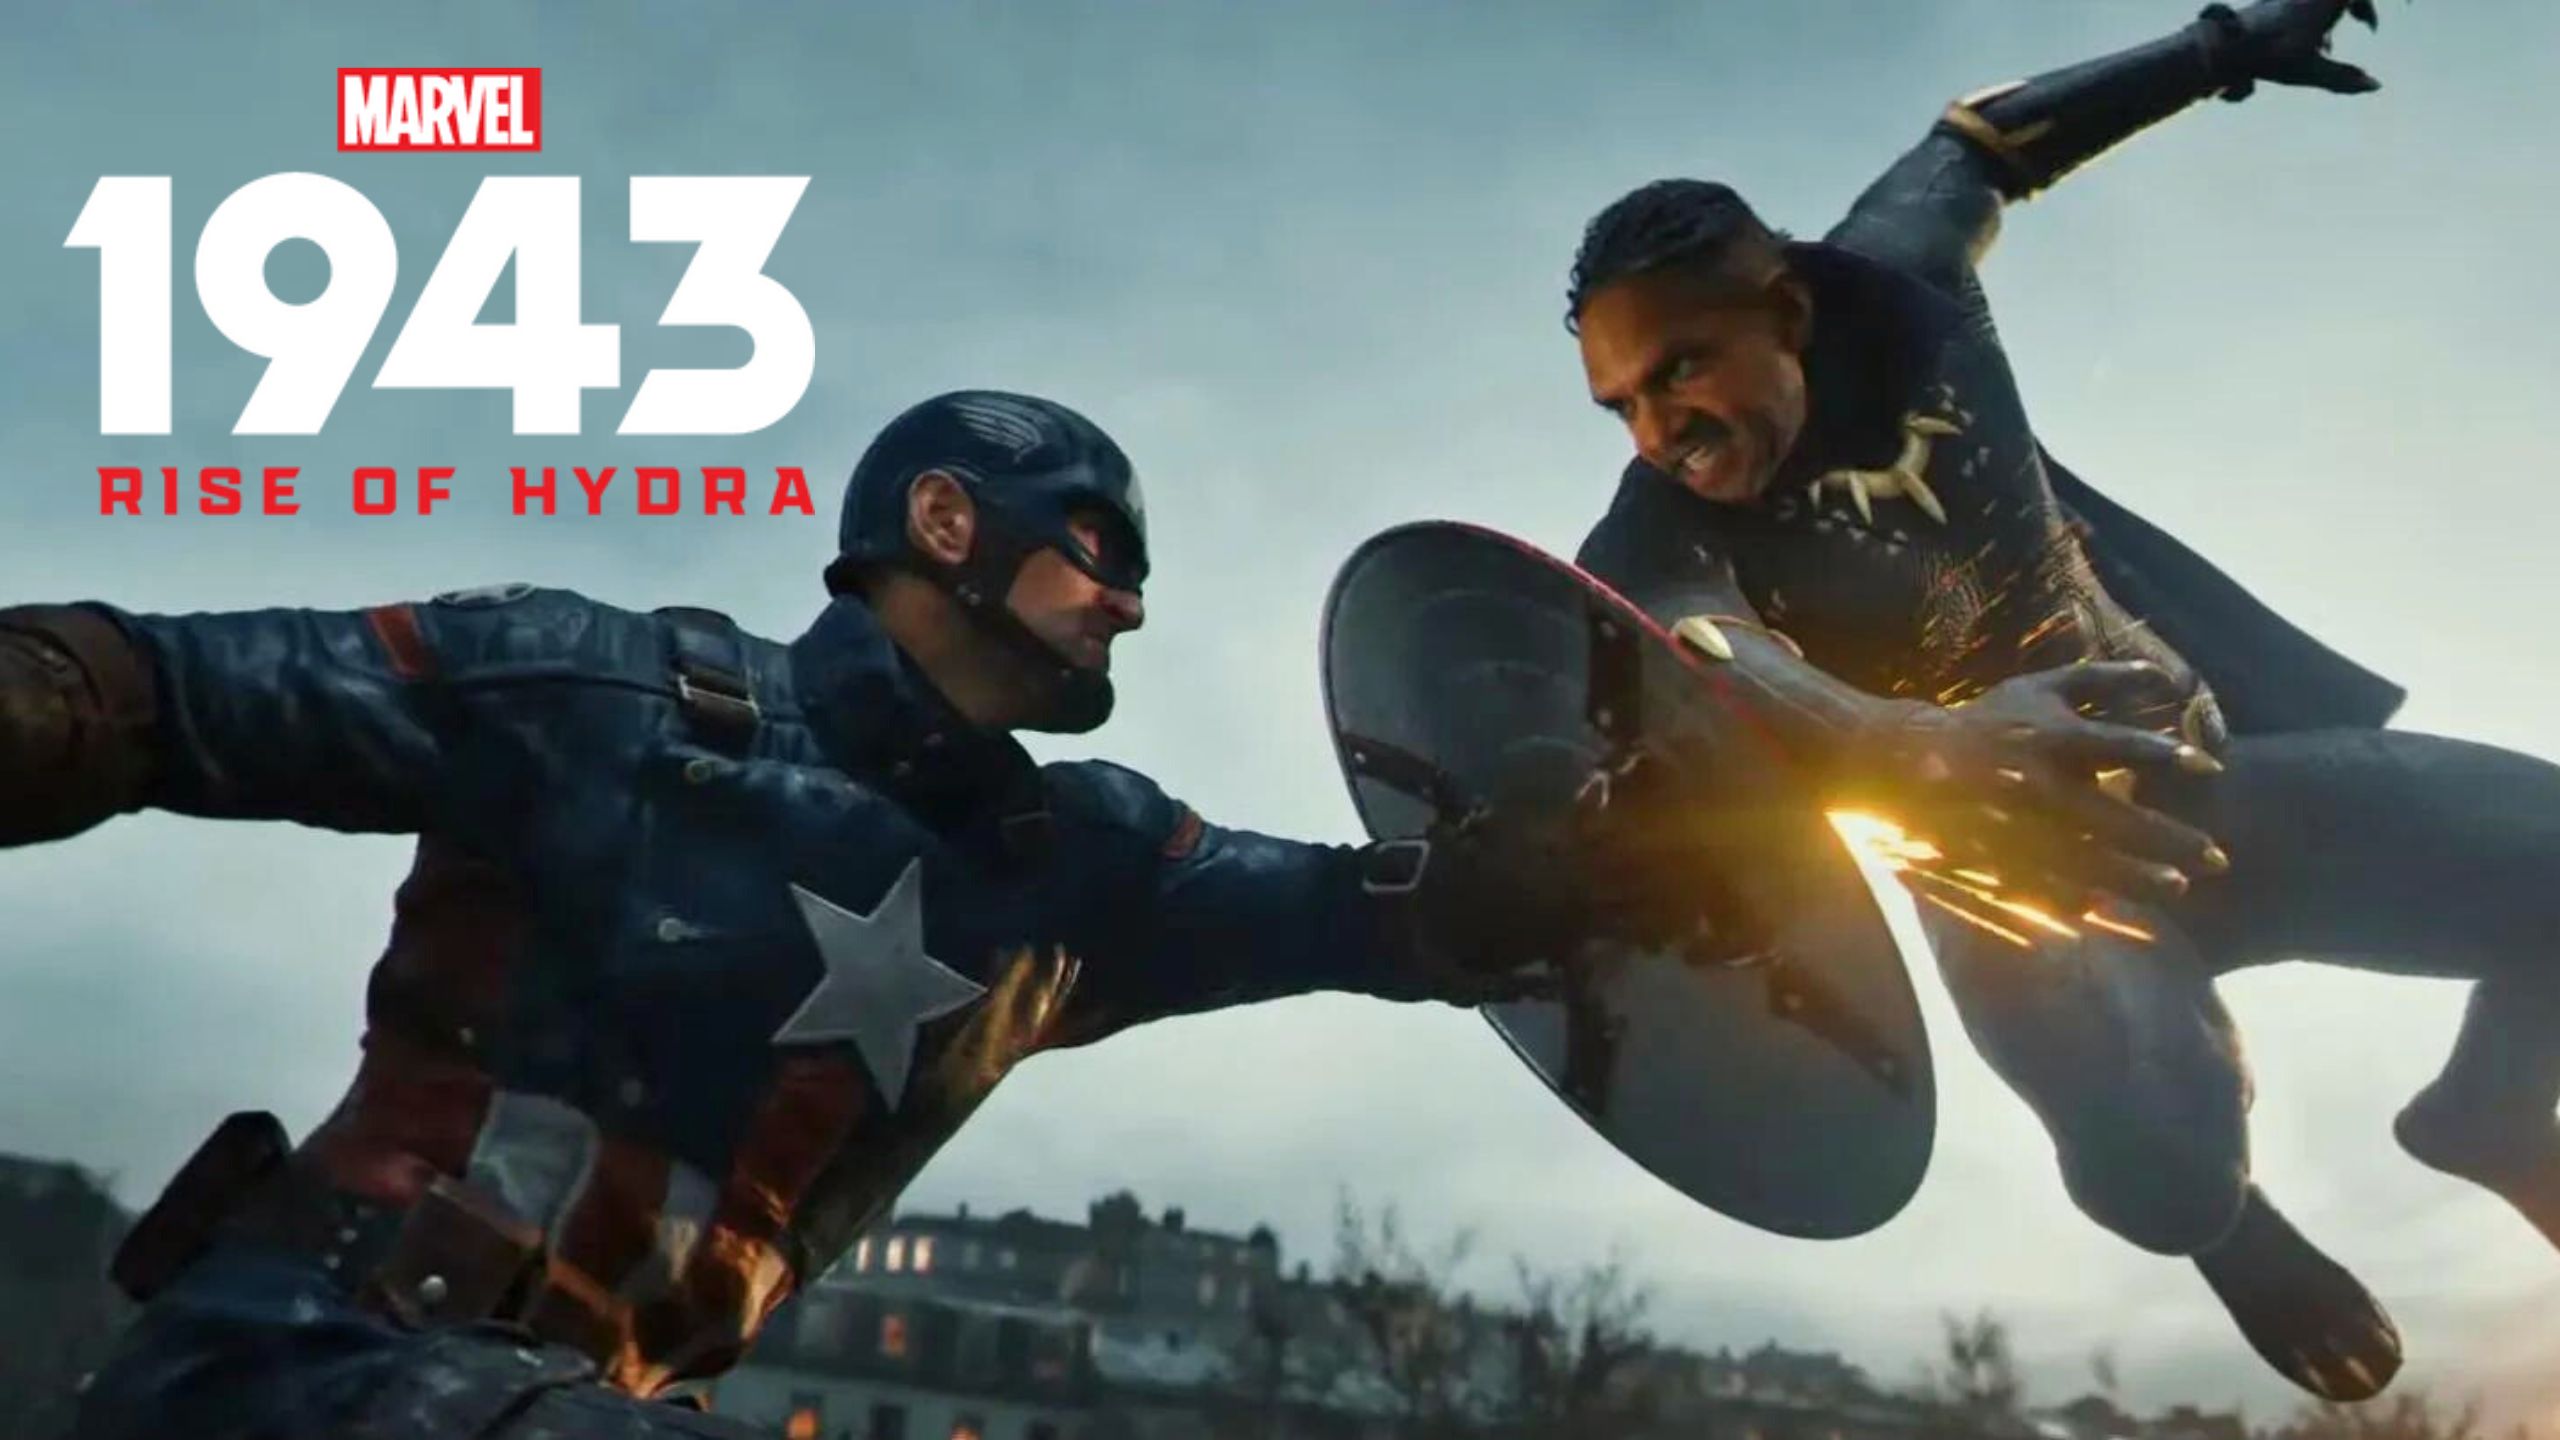 Marvel 1943: Rise of Hydra – Upcoming Captain America and Black Panther Game Story Trailer Unveiled